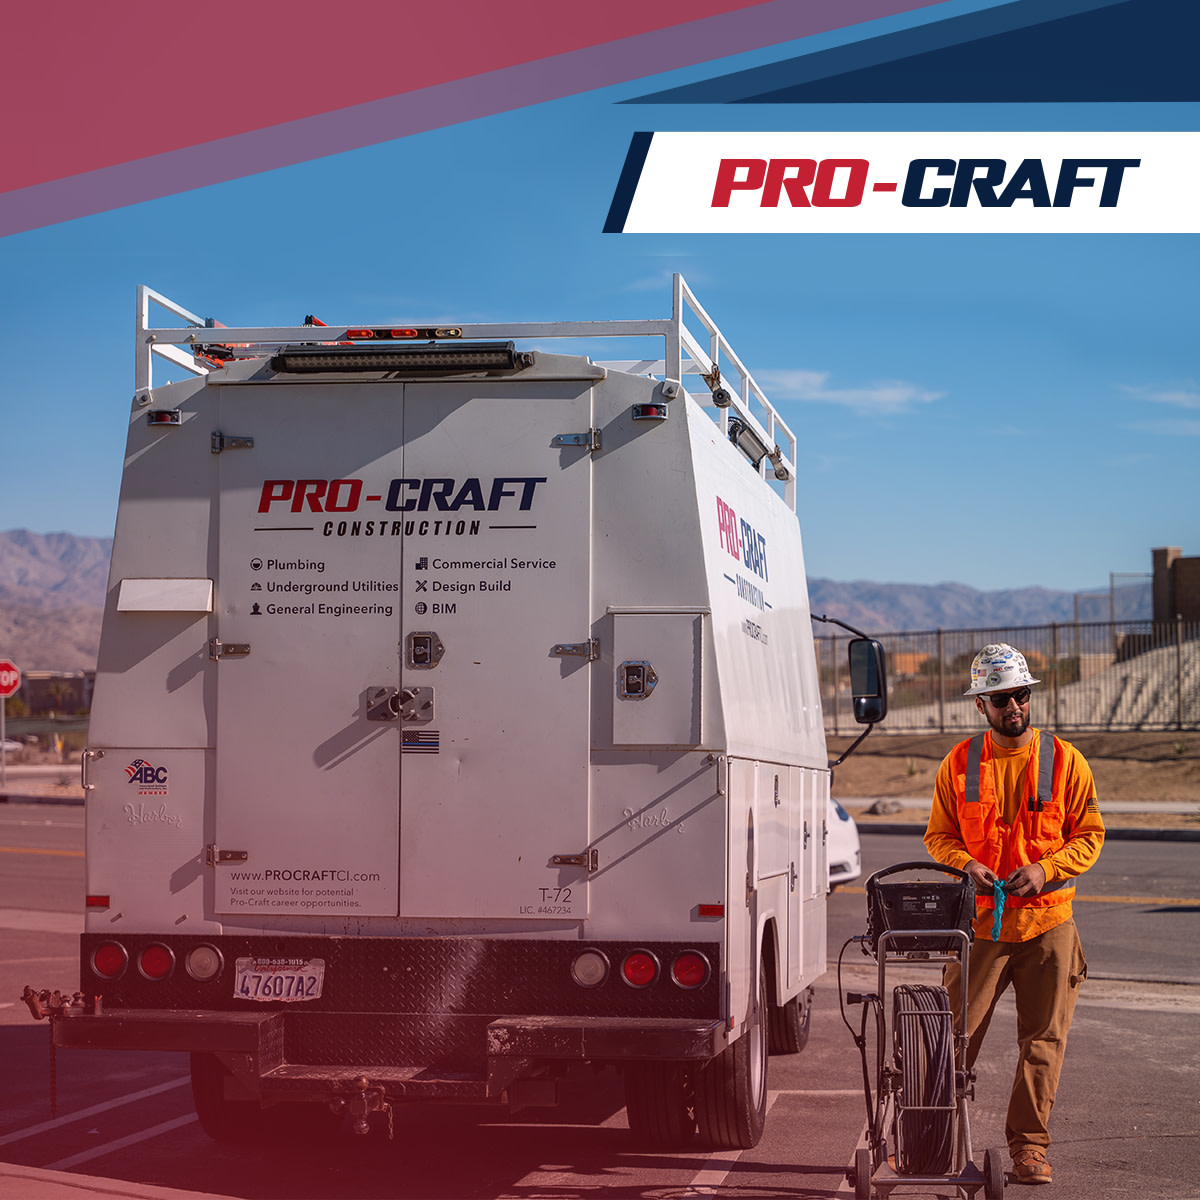 Our service doesn't sleep so you can! Pro-Craft's 'plumbing shop on wheels' is on call 24/7, 365 days a year. Rain or shine, day or night, we're here to ensure your facilities plumbing needs are met with expertise and efficiency. #AlwaysOnCall #ProCraftReliability